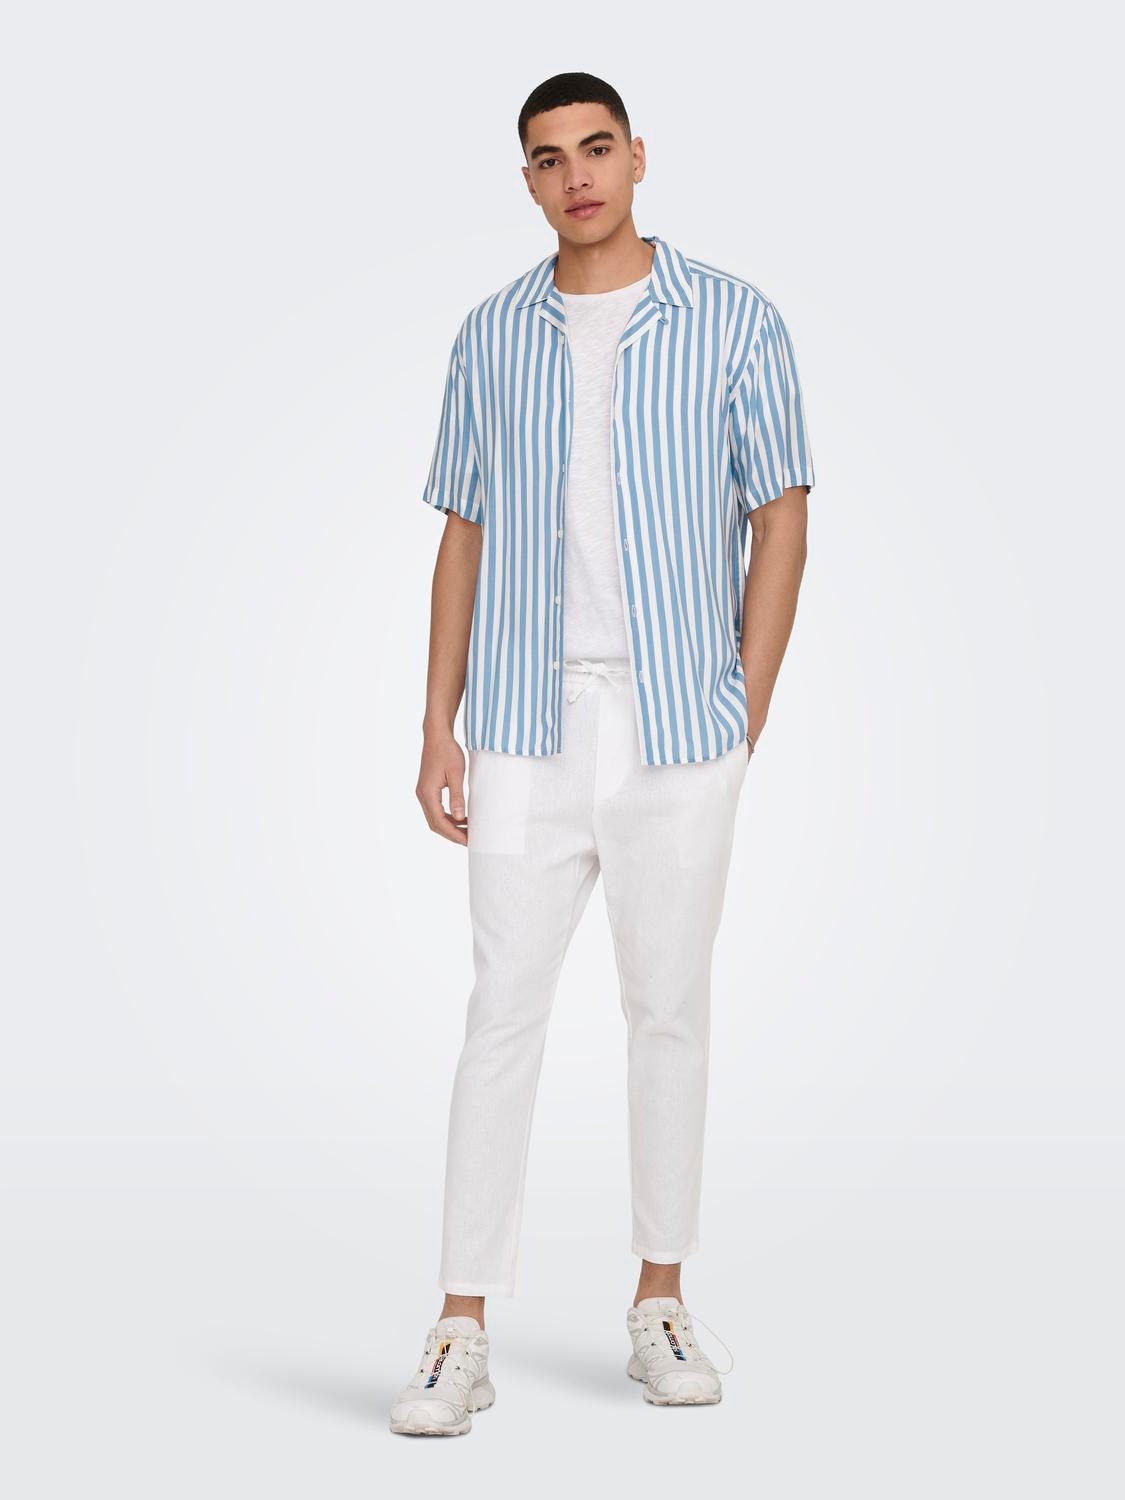 ONLY & SONS ONSLINUS CROP 0007 COT LIN PNT -Bright White - 22024966